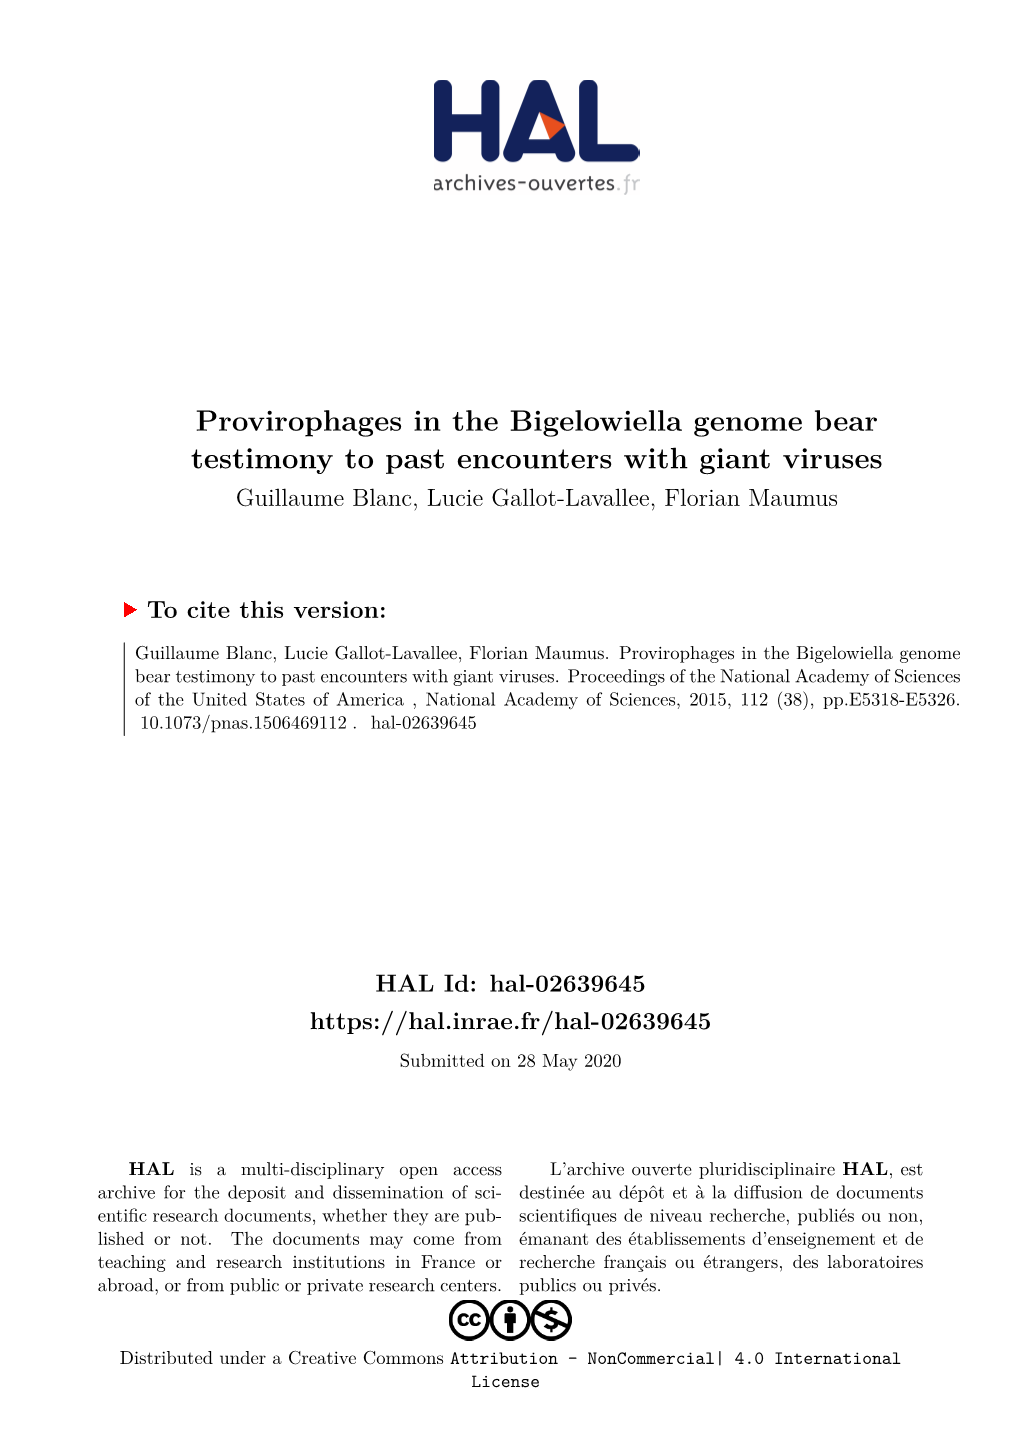 Provirophages in the Bigelowiella Genome Bear Testimony to Past Encounters with Giant Viruses Guillaume Blanc, Lucie Gallot-Lavallee, Florian Maumus